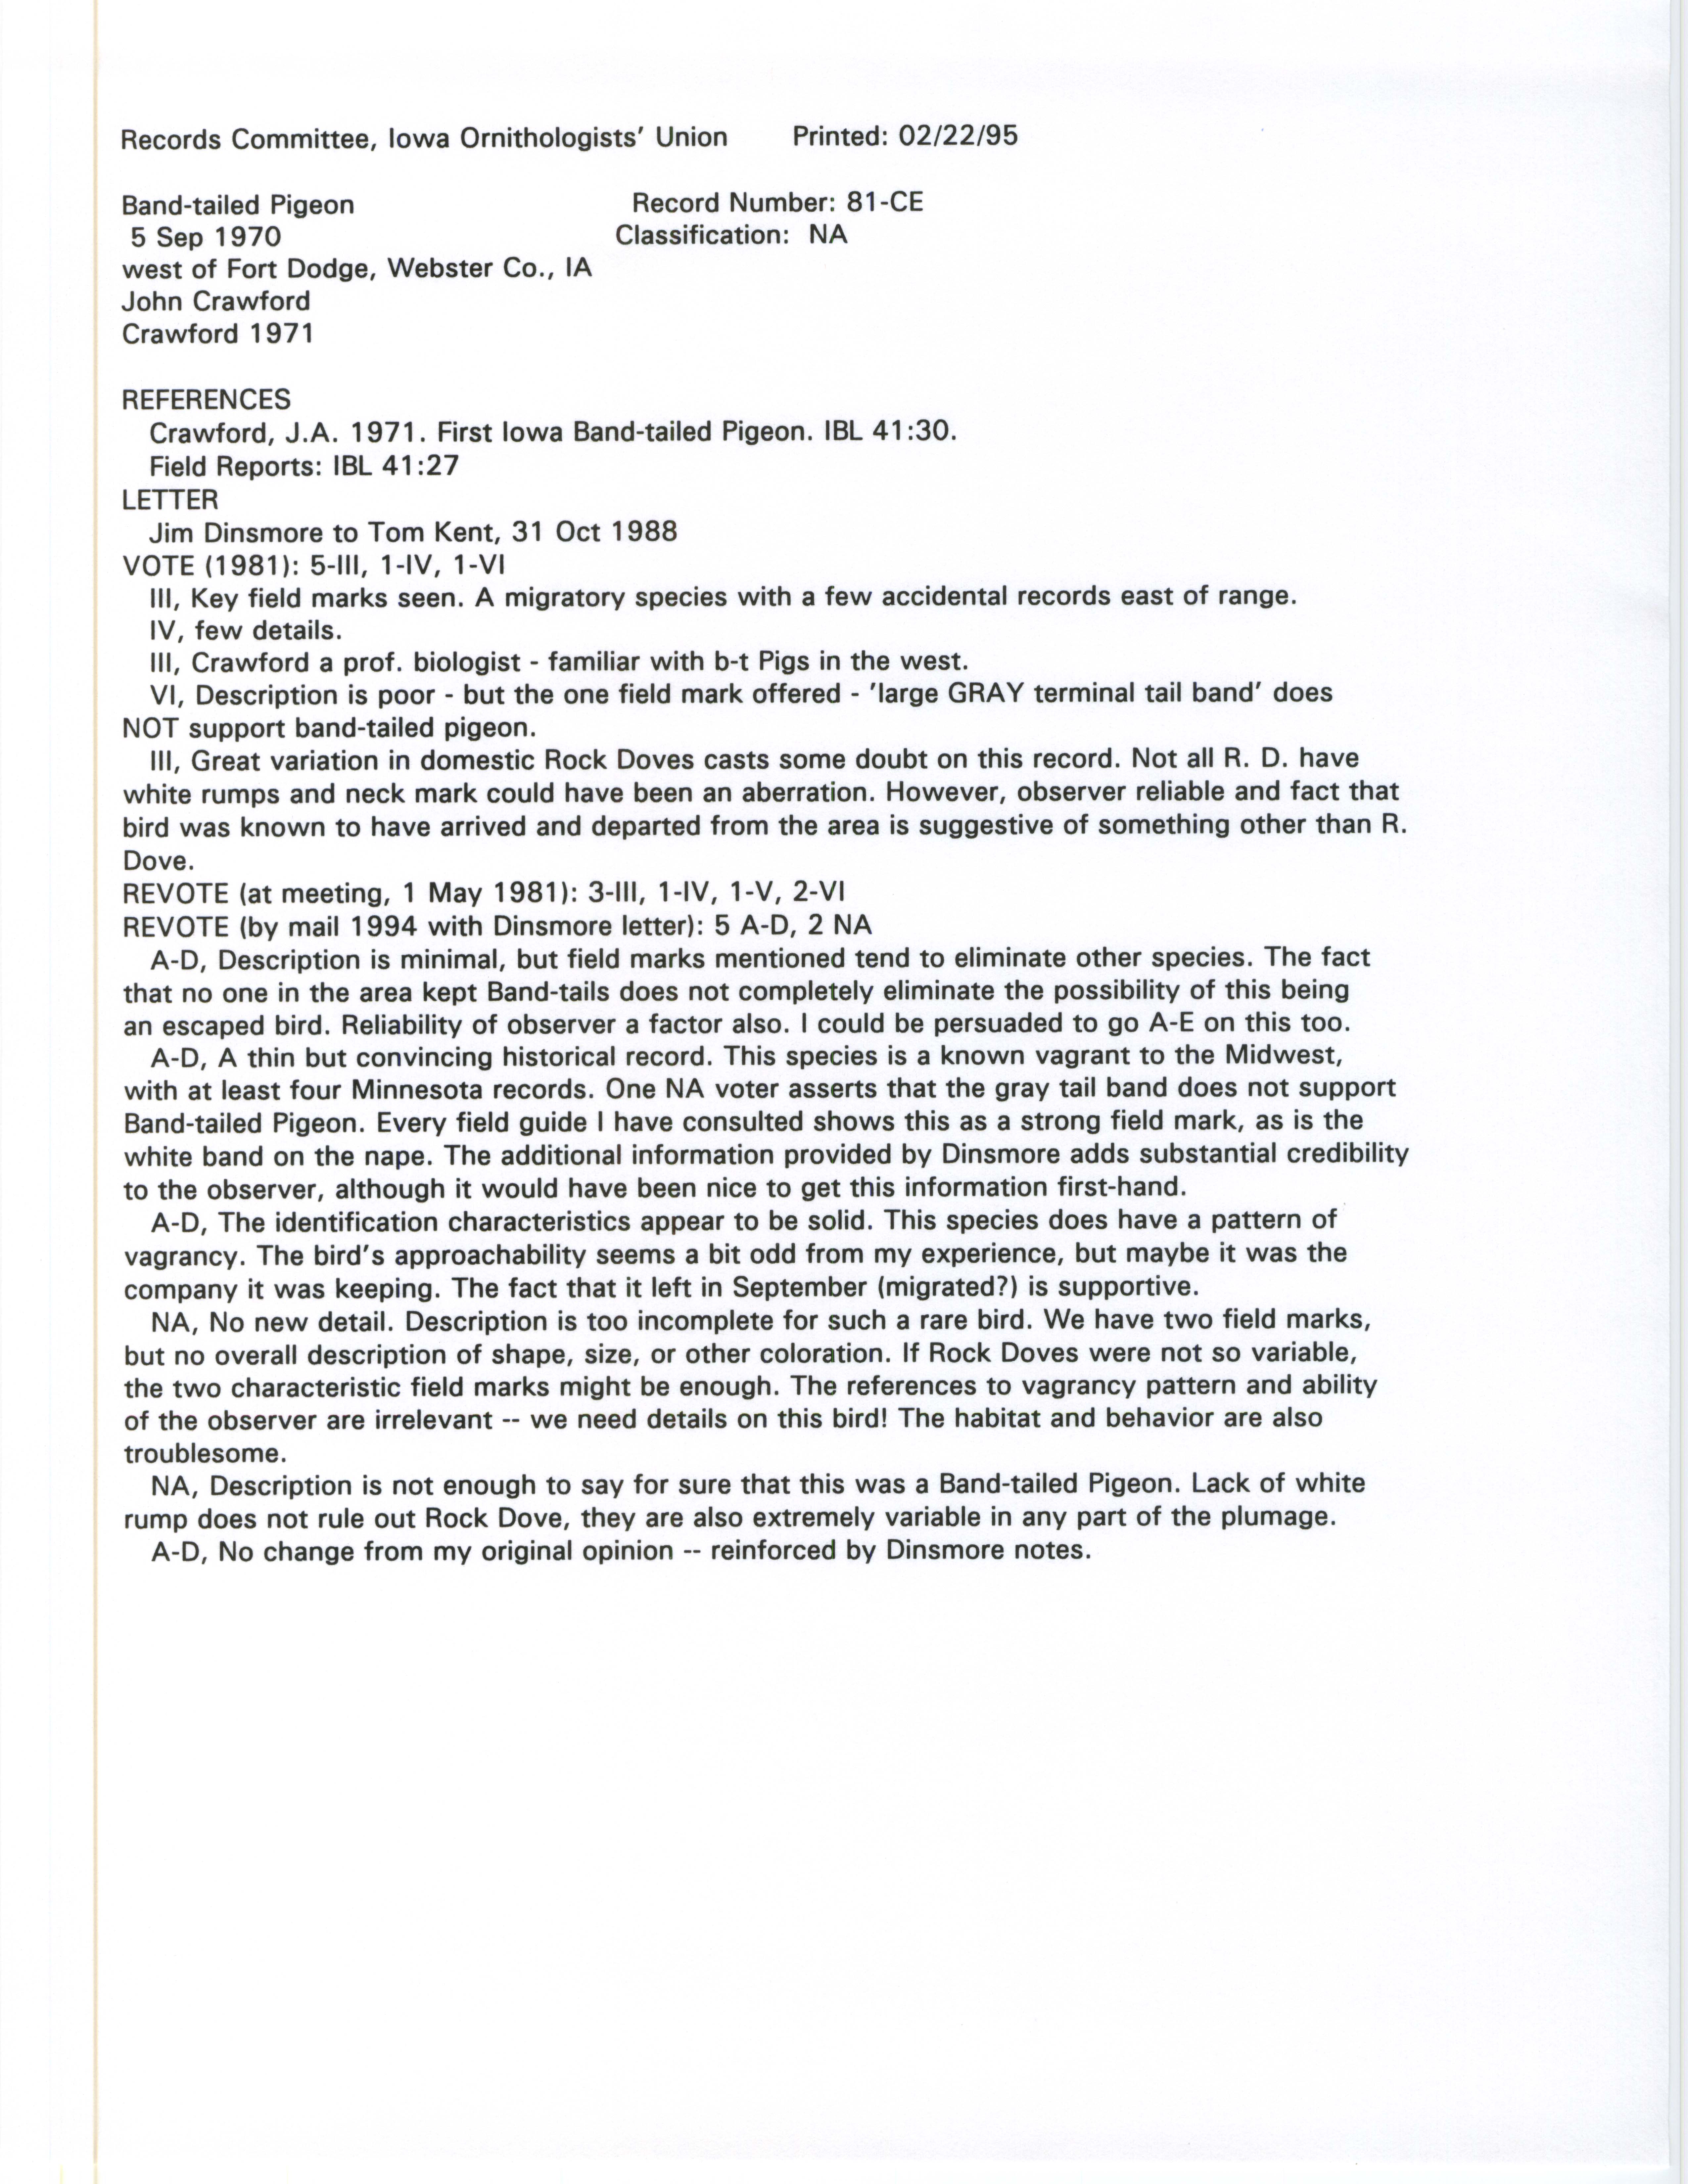 Records Committee review for rare bird sighting of Band-tailed Pigeon west of Fort Dodge, 1970